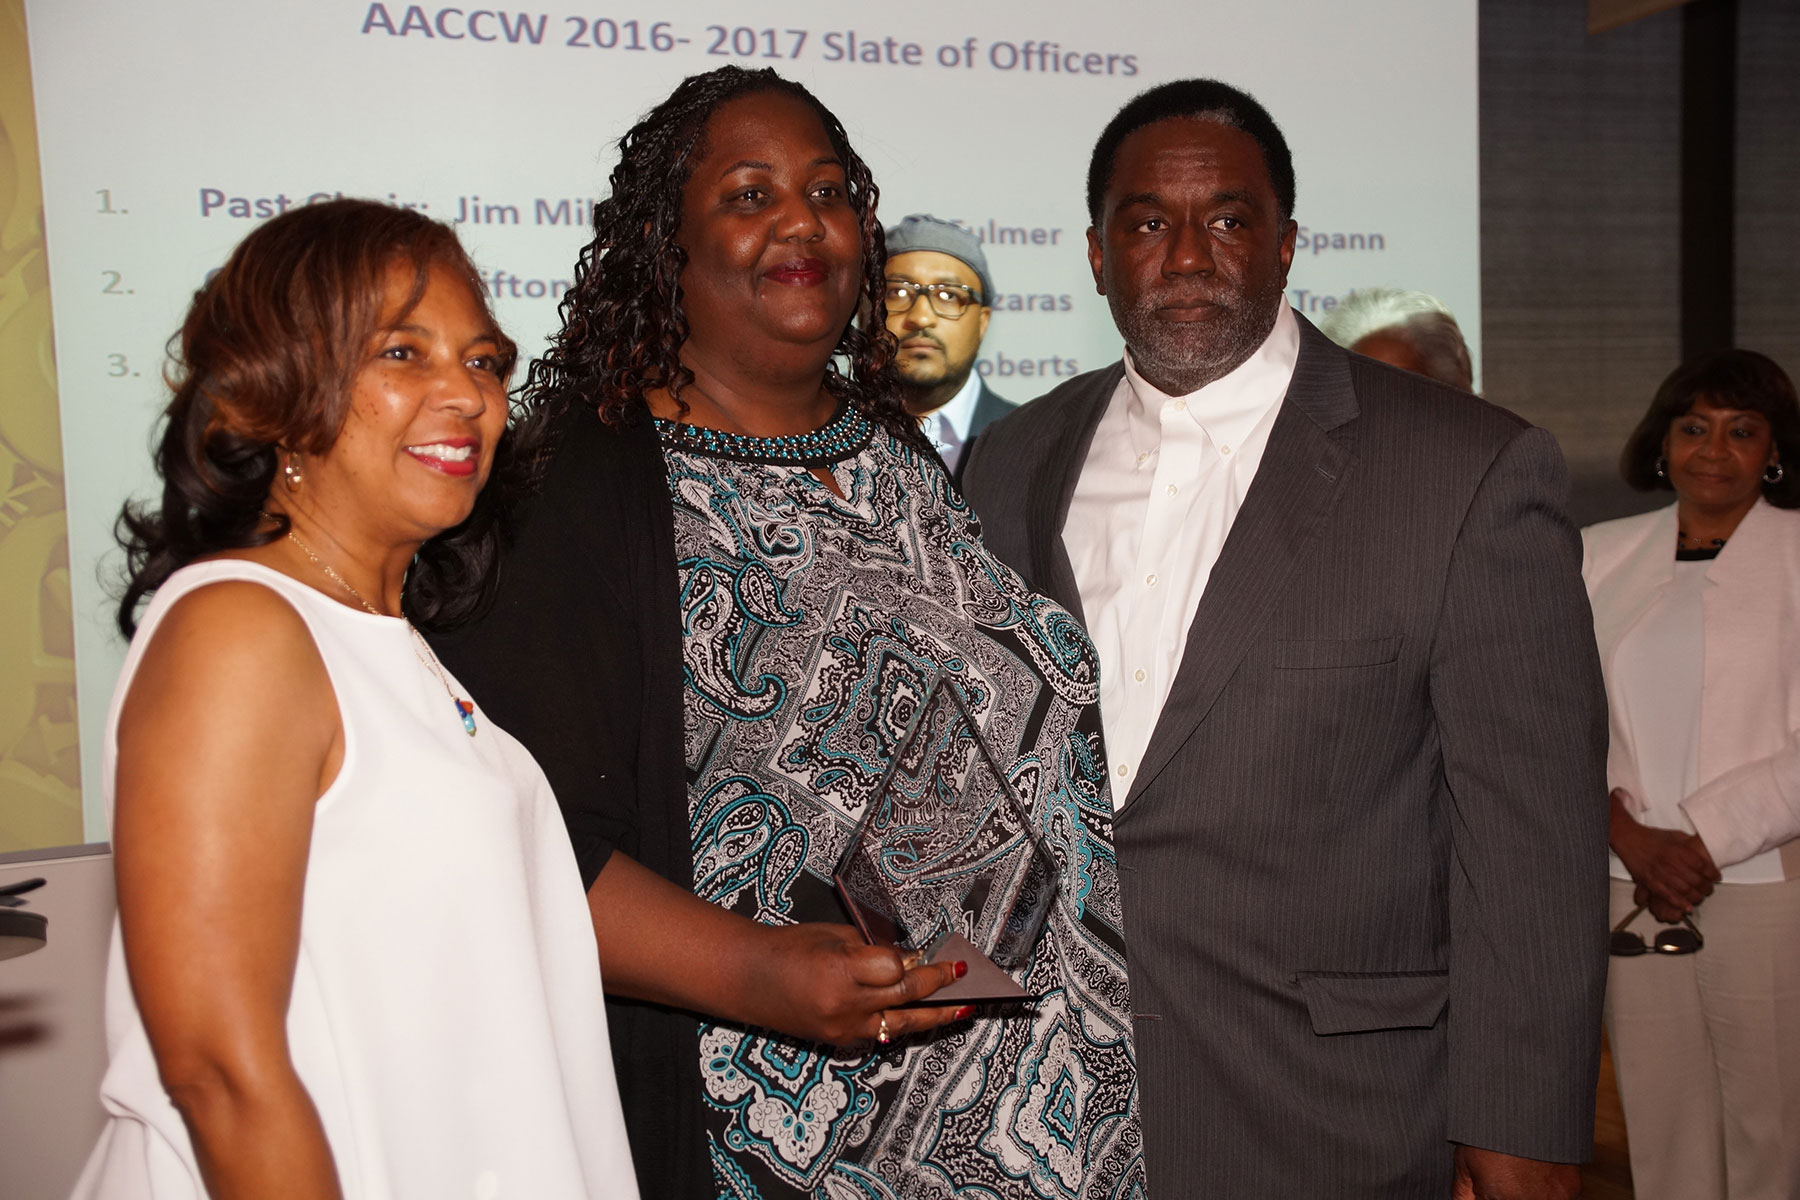 062816_AACCW-Annual_255